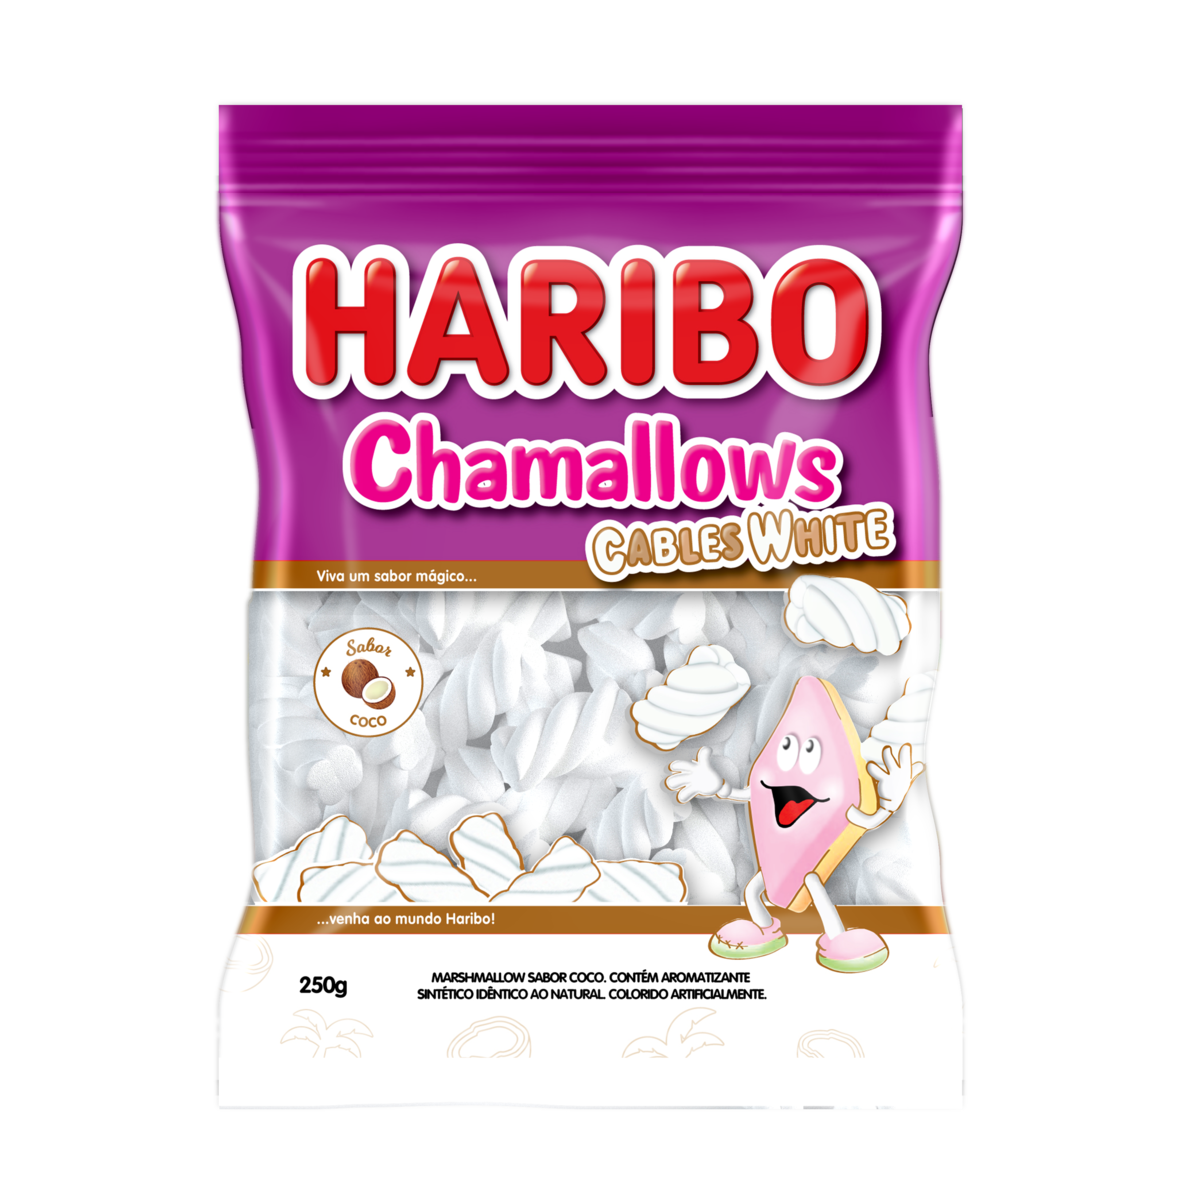 7898629570843 - MARSHMALLOW COCO CABLES WHITE HARIBO CHAMALLOWS PACOTE 250G